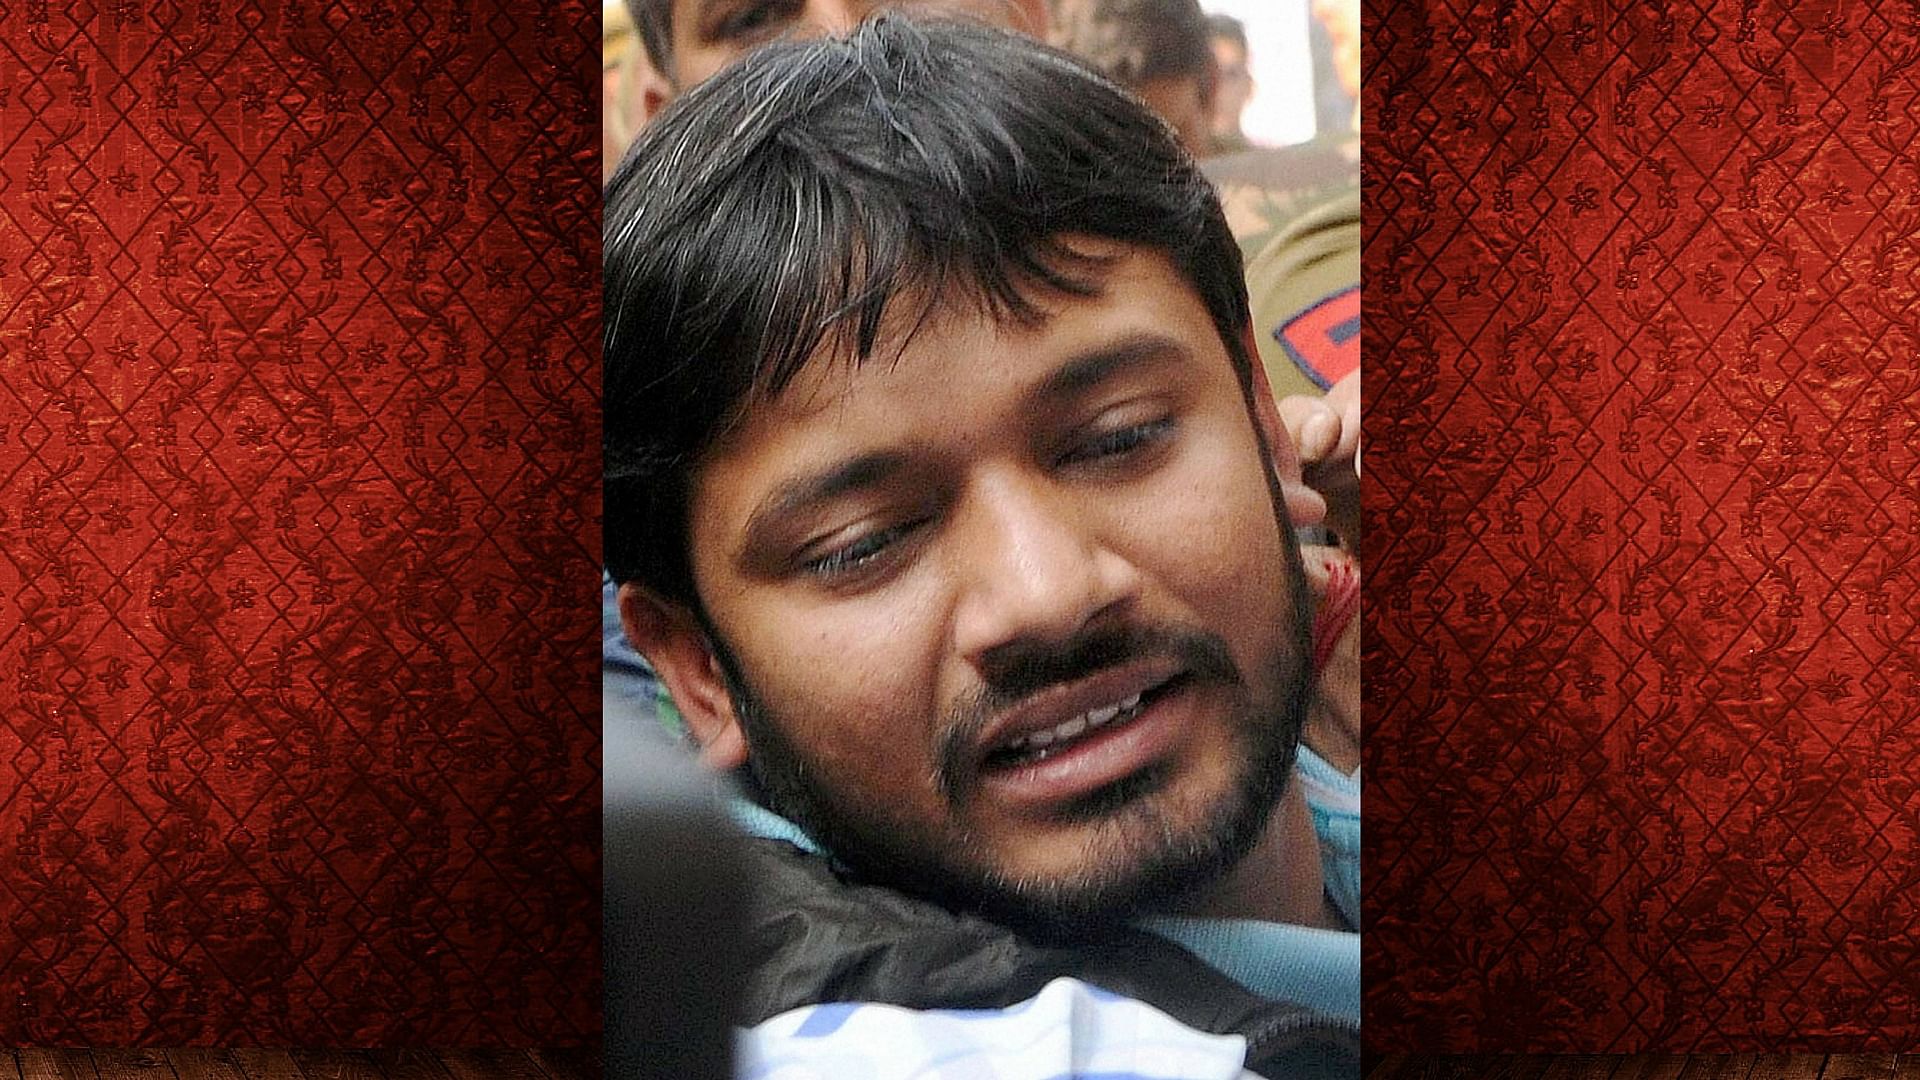  JNUSU President Kanhaiya Kumar, who had been arrested on charges of sedition, being produced at Patiala House Courts in New Delhi last week.. (Photo: PTI/Altered by The Quint)